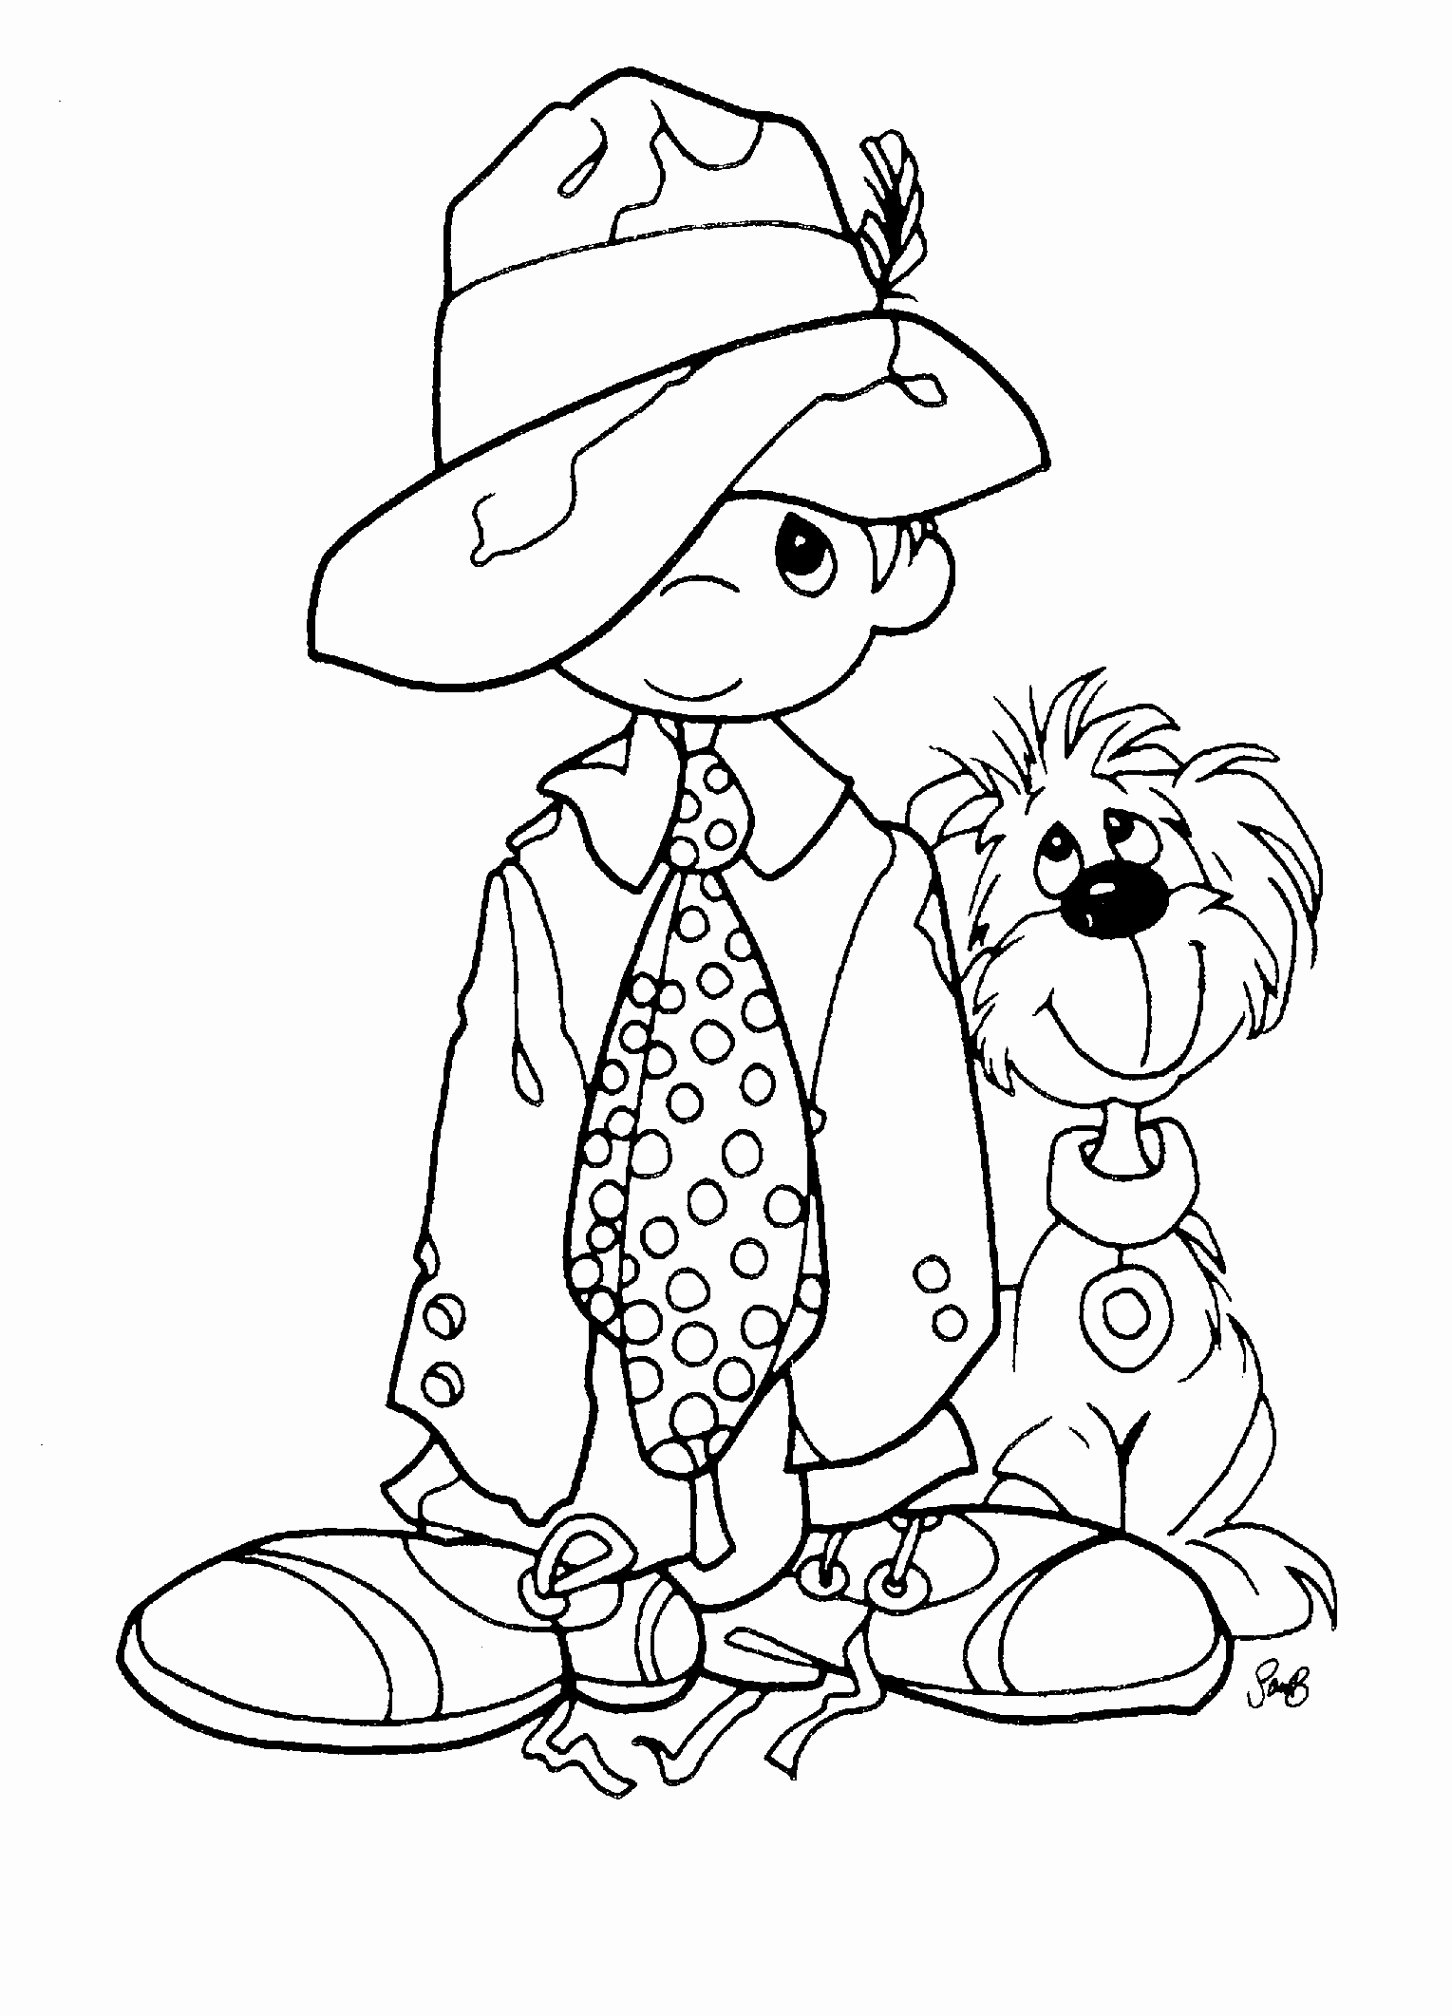 Precious Moments Baby Coloring Pages Coloring Book Ba Precious Moments Pictures Black And White Free